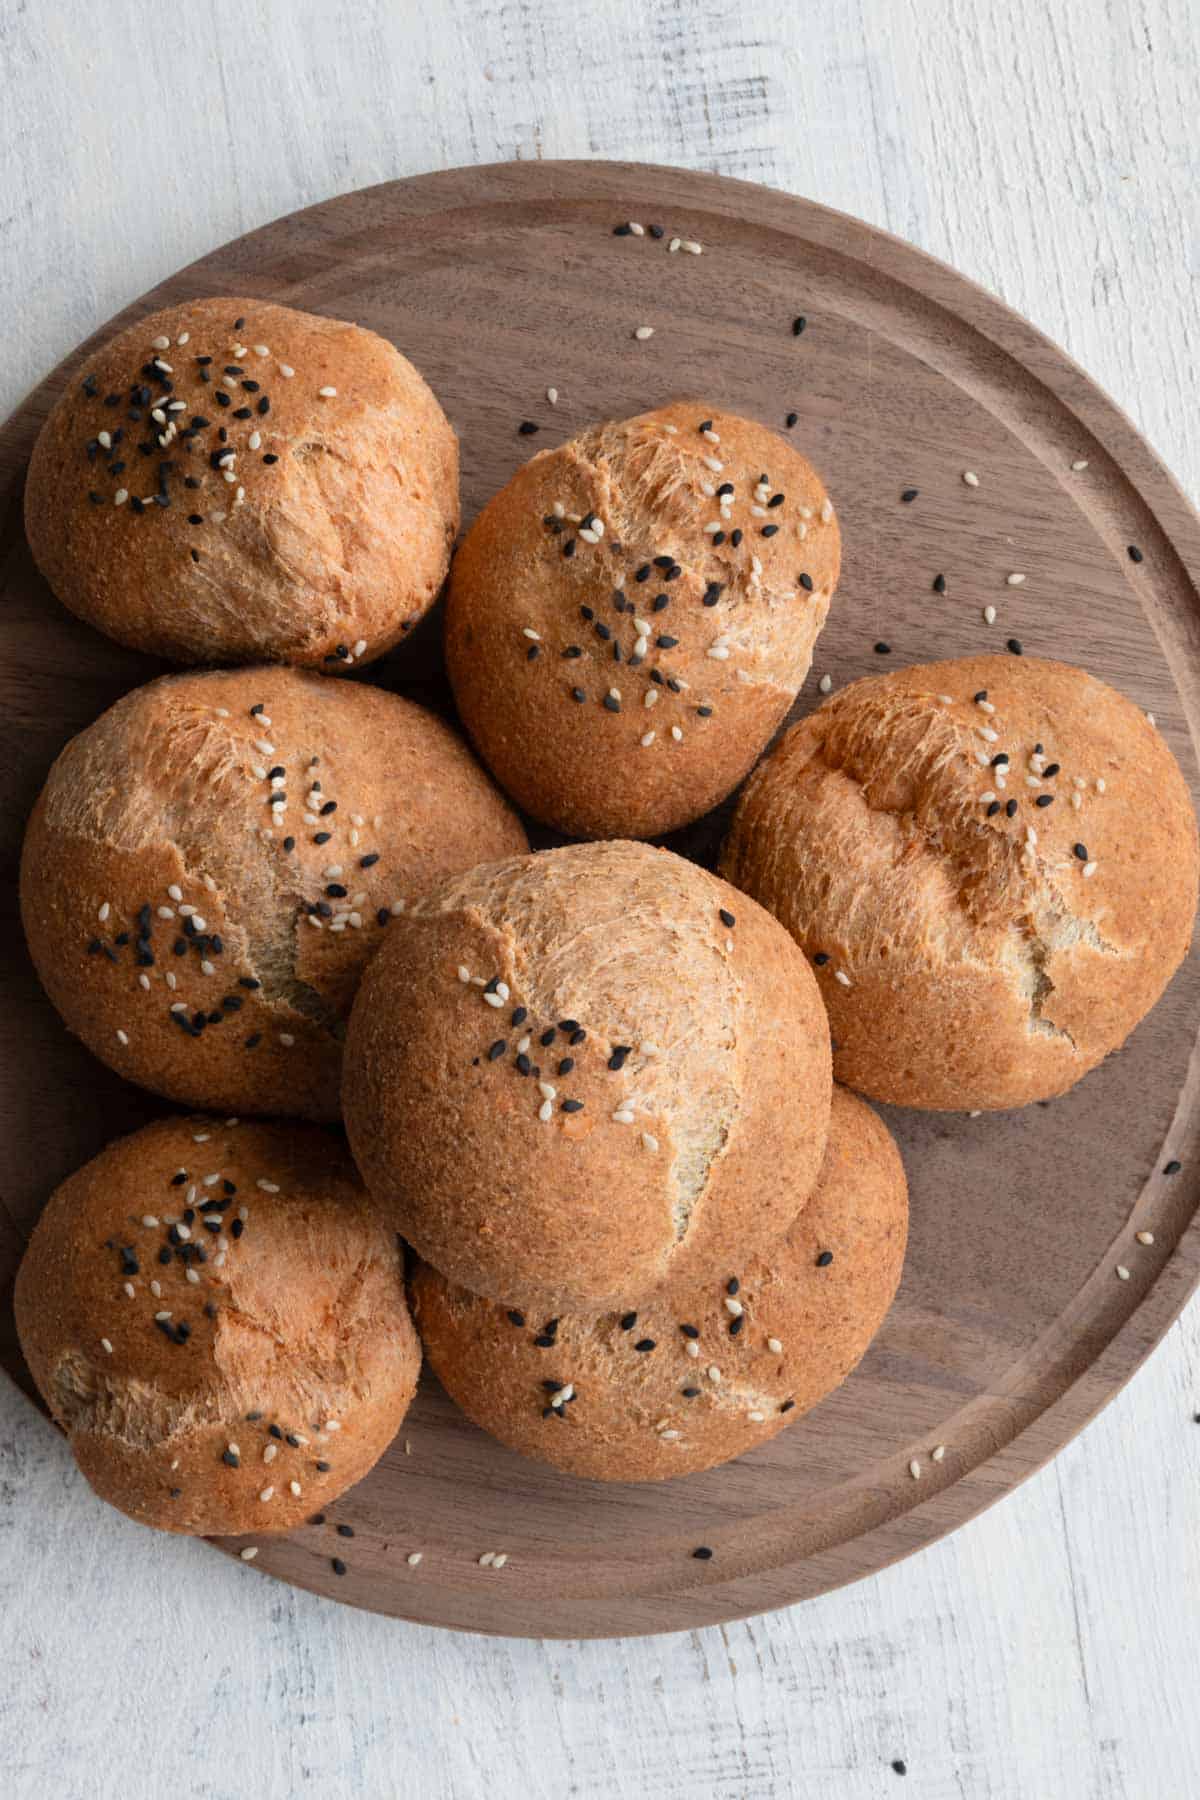 Seven red lentil gluten-free rolls with black and white sesame seeds on top on a round wooden cutting board.